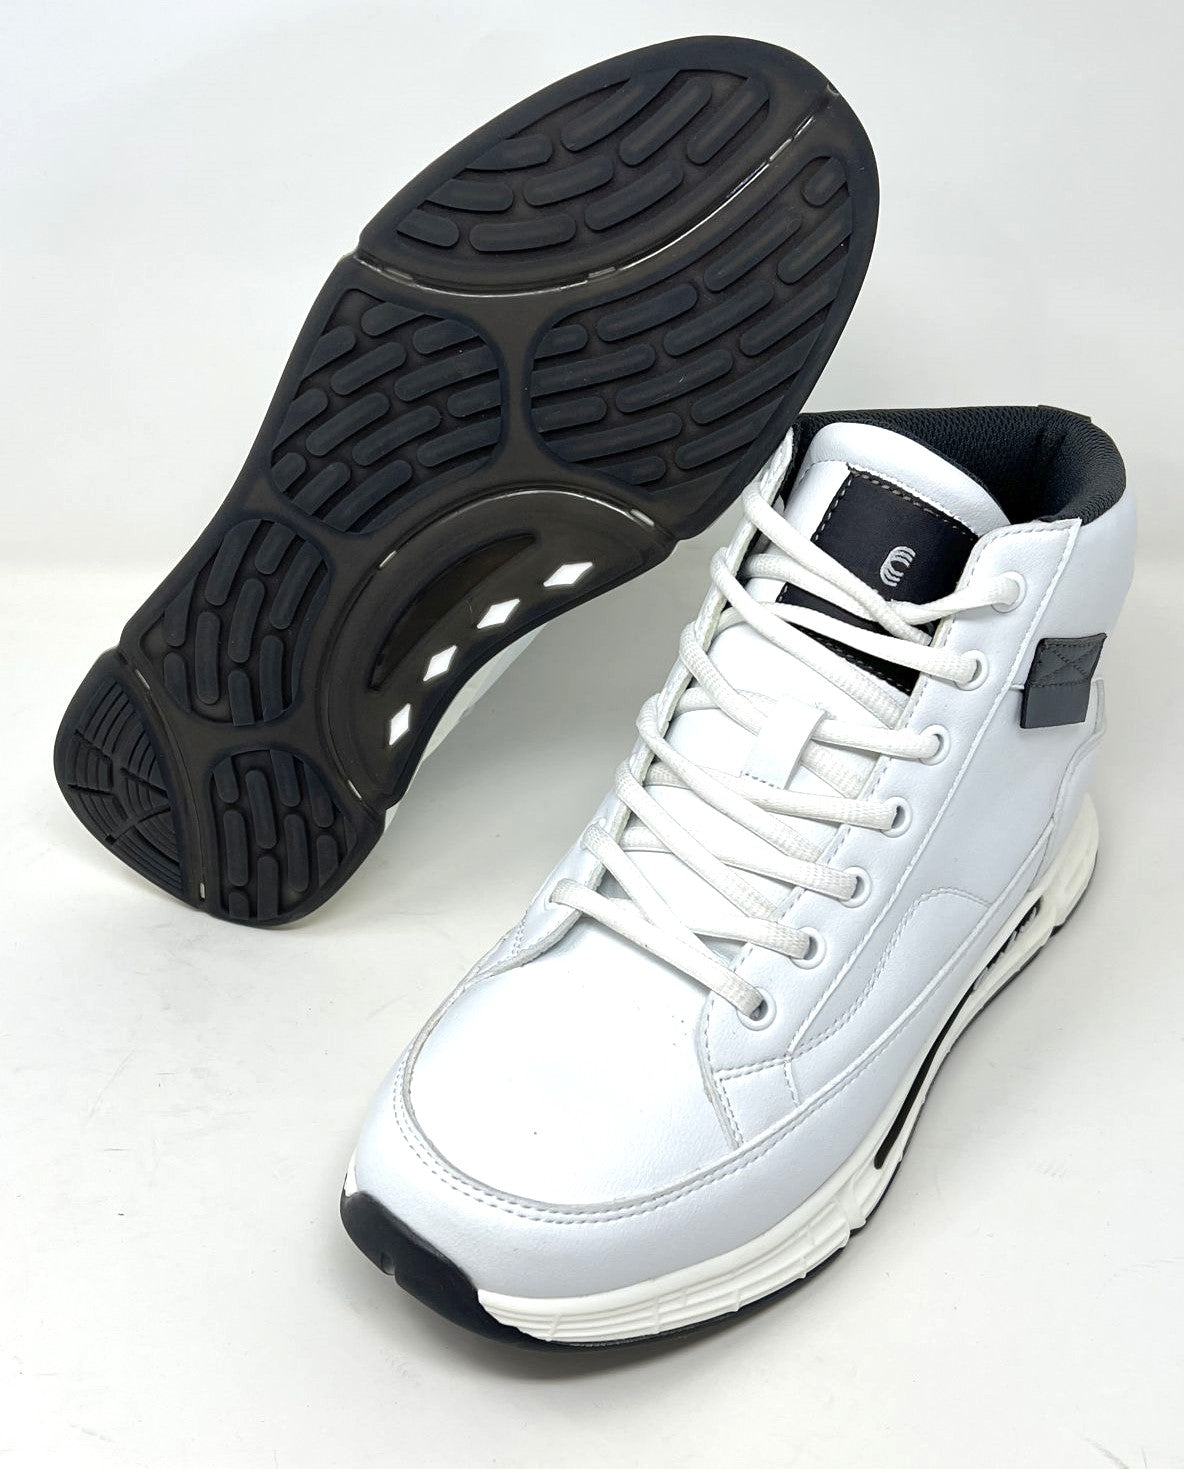 FSF0126 - 2.8 Inches Taller (White) - Size 9 Only